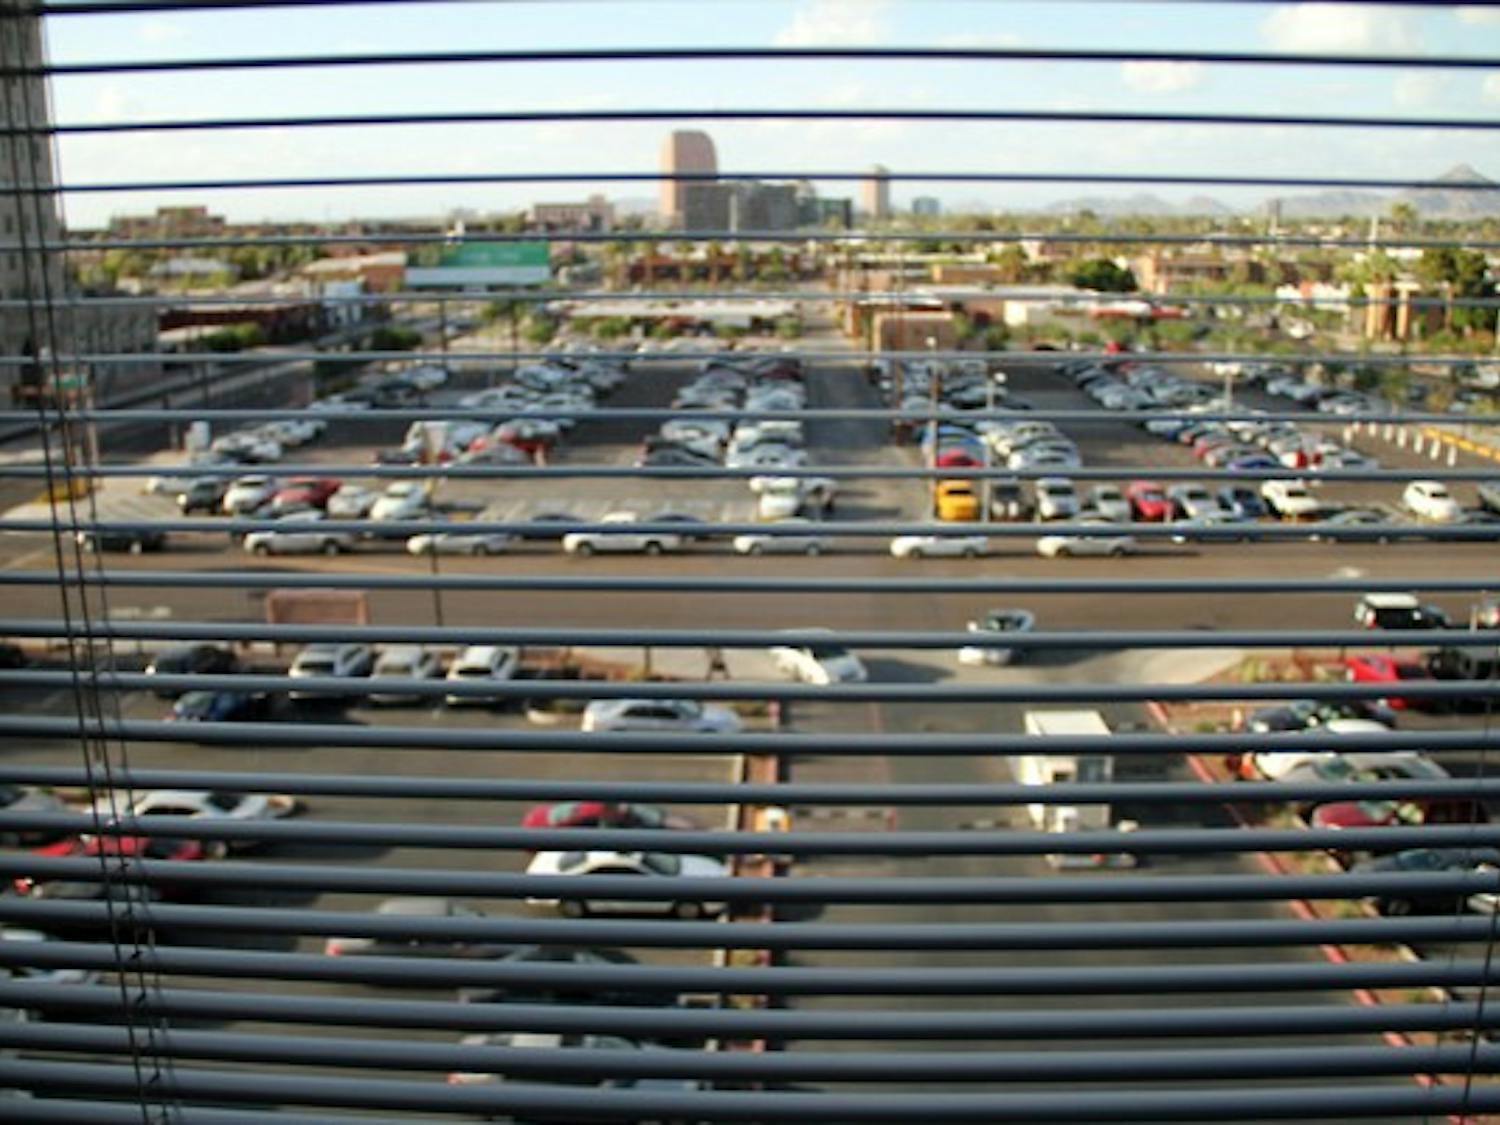 Blinds cut through the view of downtown Phoenix from a window in the Cronkite School building Wednesday afternoon. (Photo by Diana Lustig)